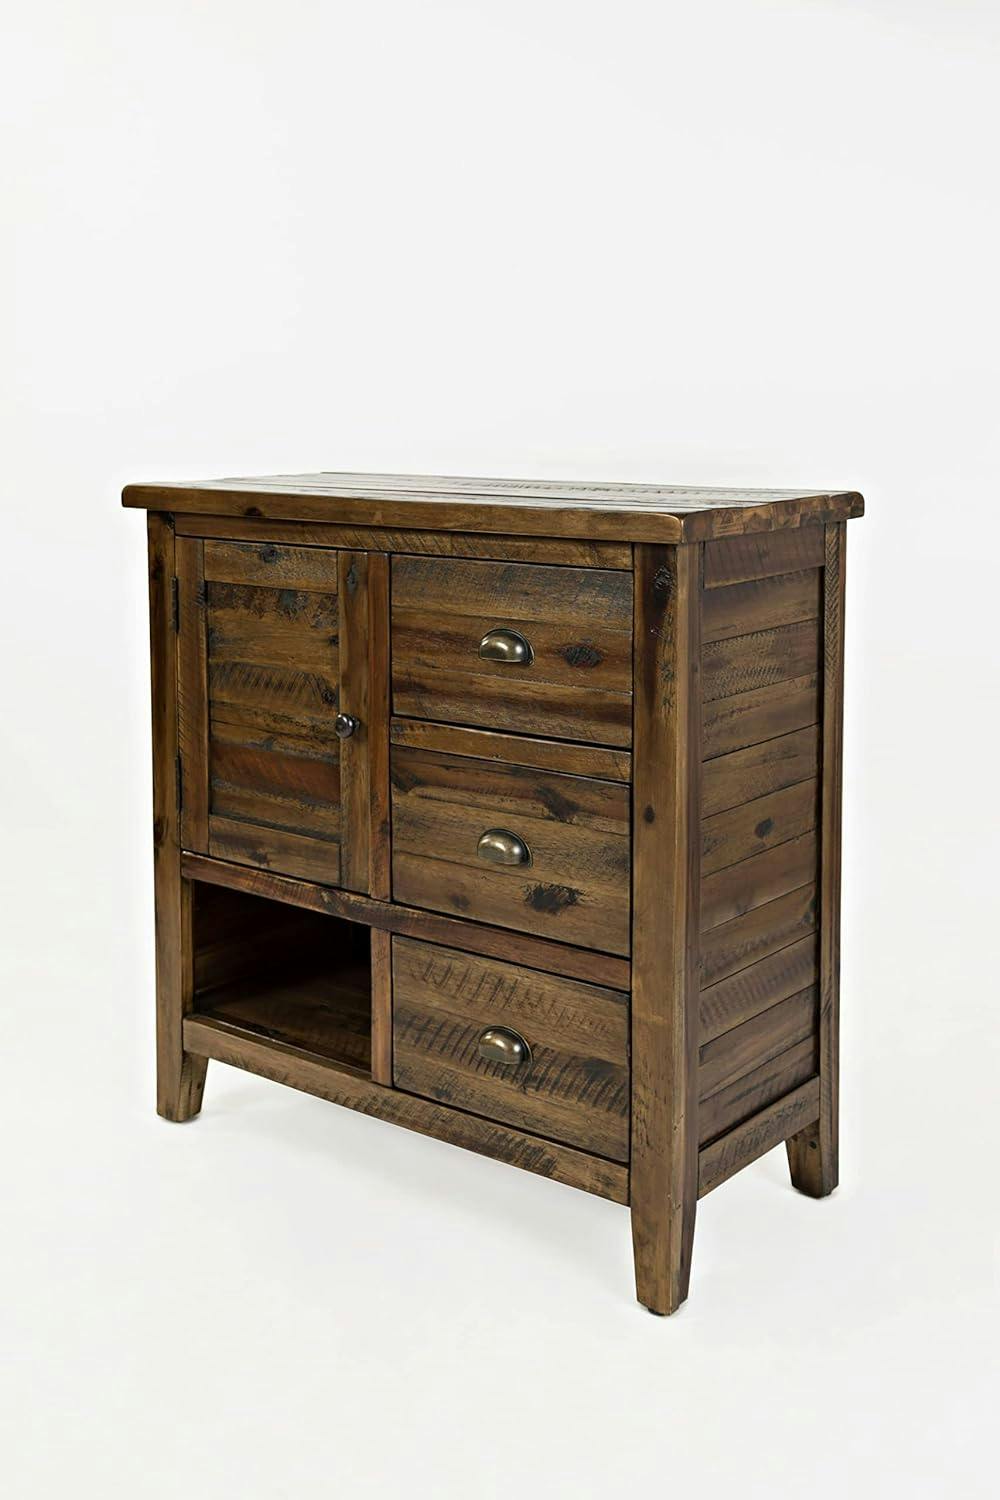 Rustic Dakota Oak 3-Drawer Accent Chest with Metal Cup Pulls